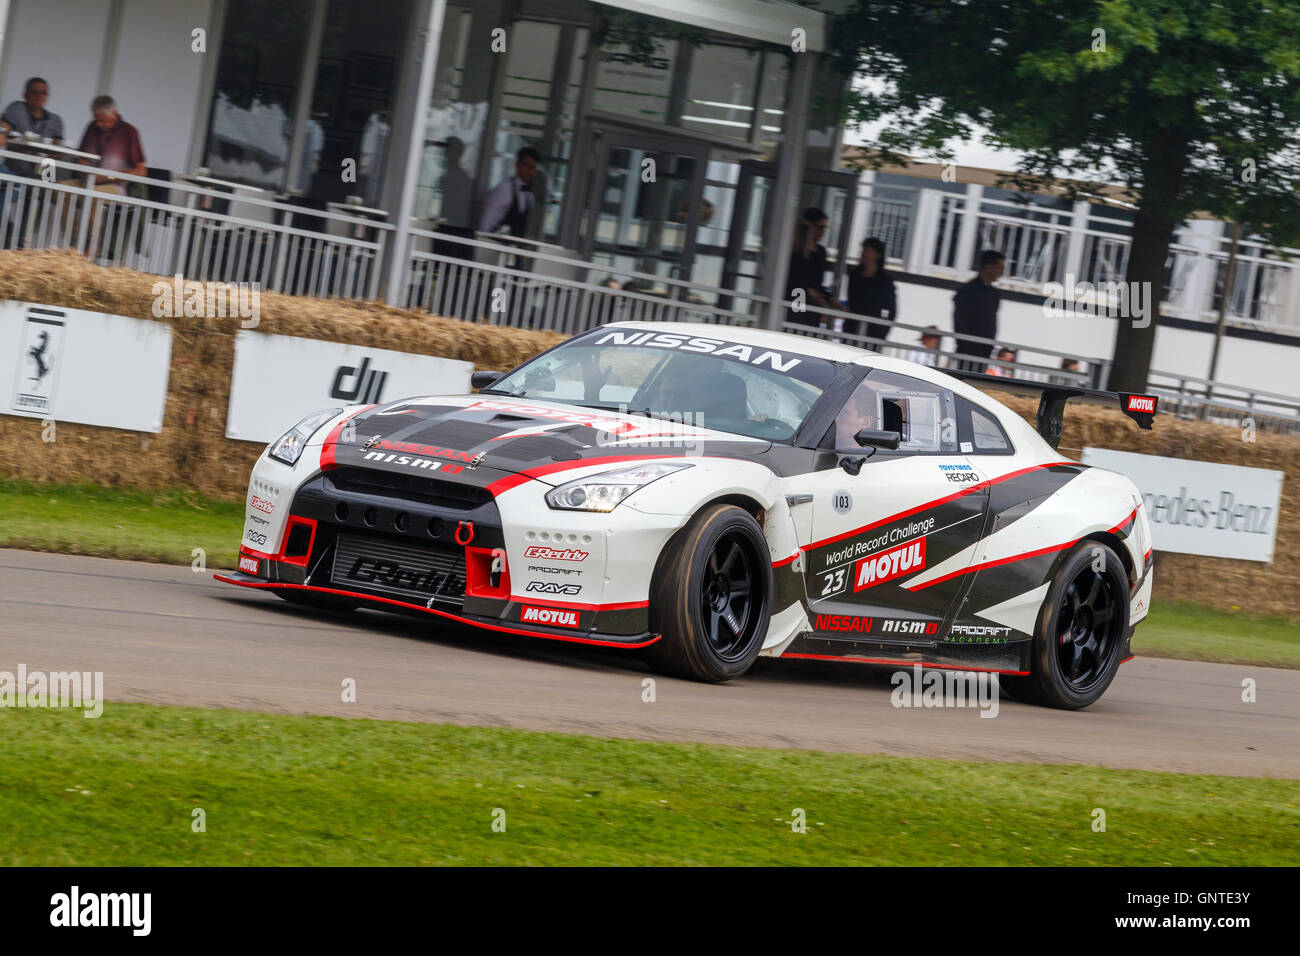 2015 Nissan R35 GT-R Drift car with driver James Deane at the 2016 Goodwood Festival of Speed, Sussex, UK. Stock Photo